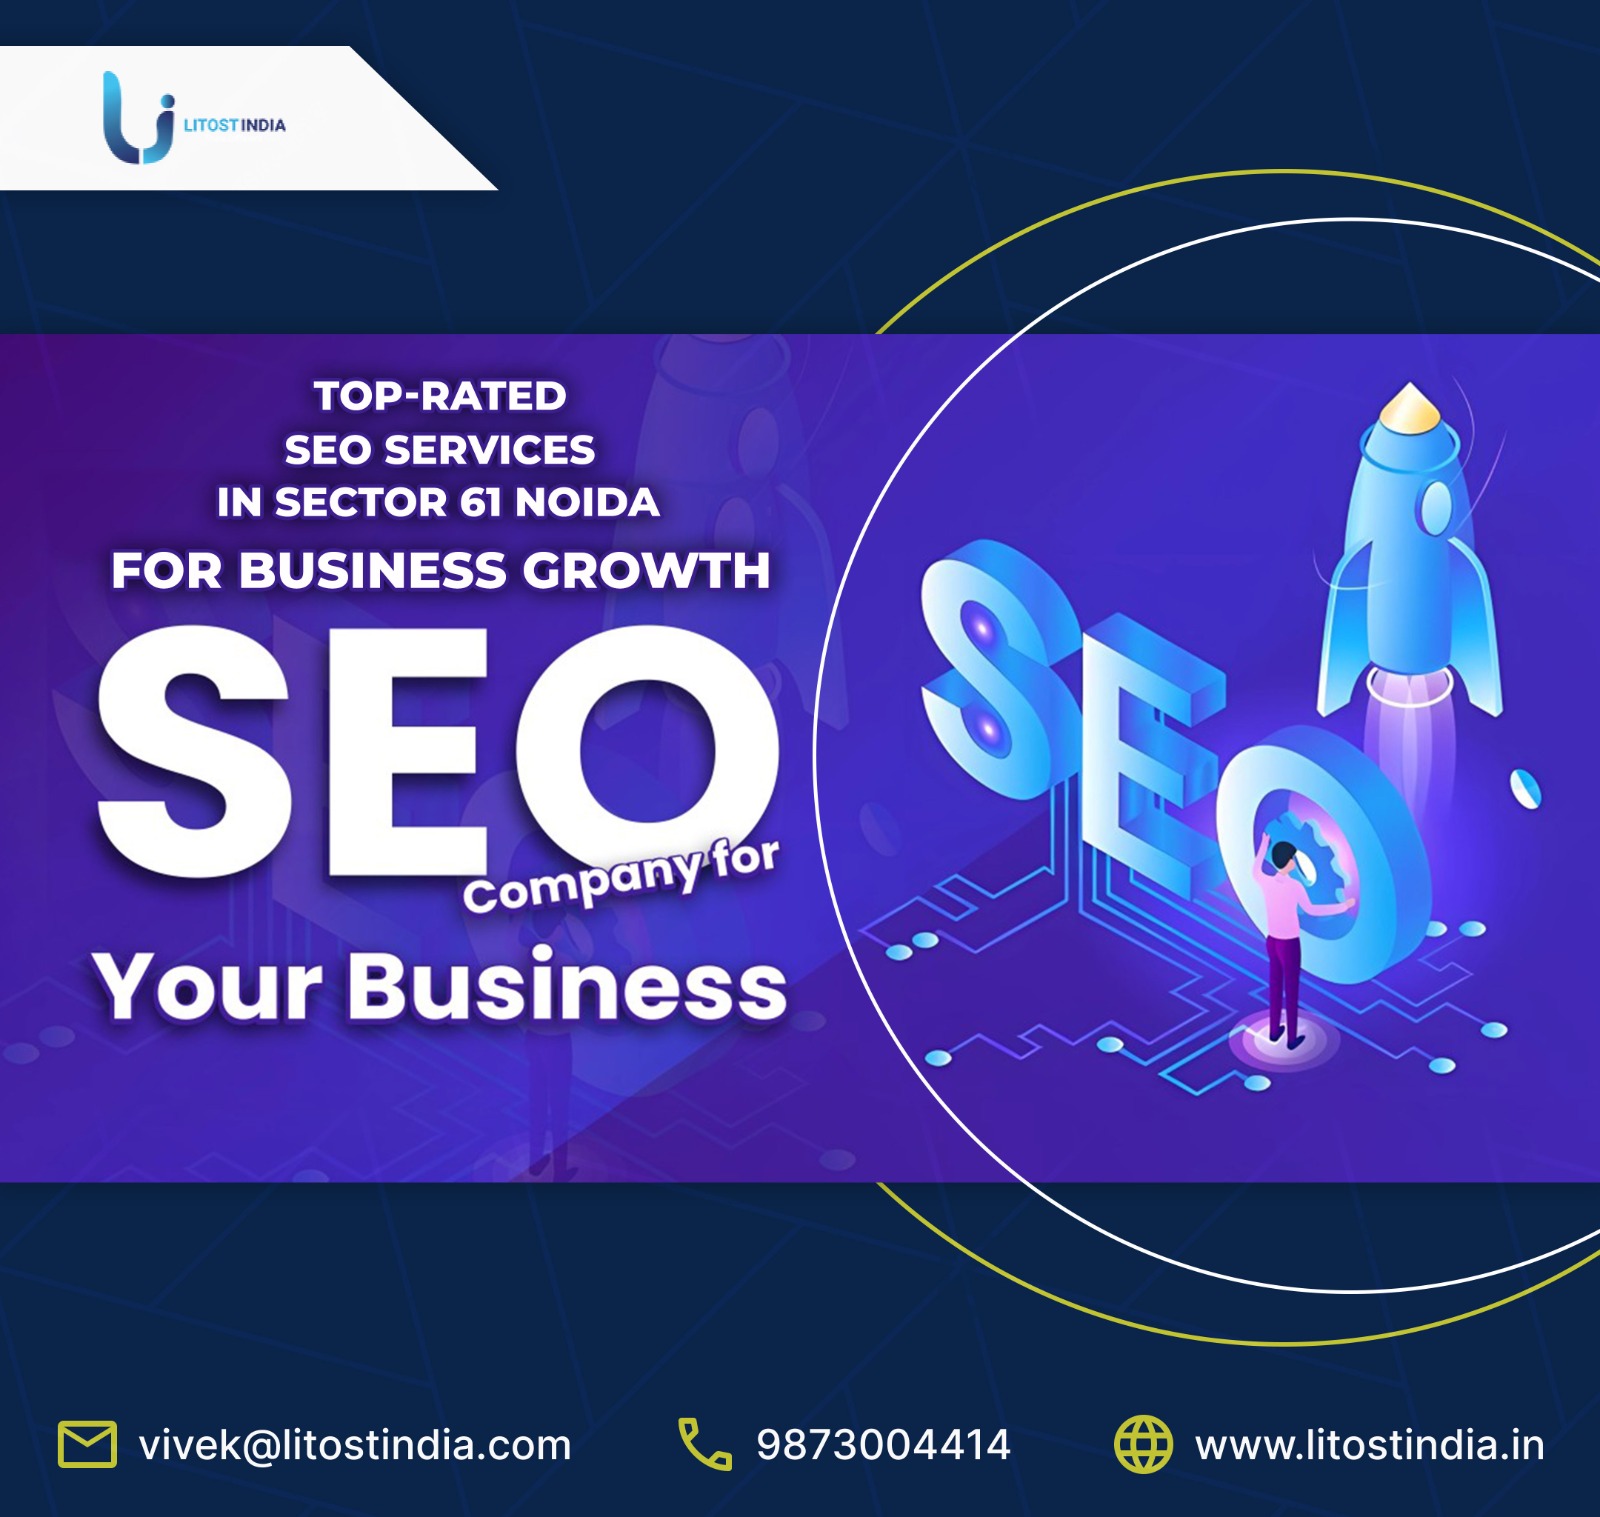 Top-Rated SEO Services in Sector 61 Noida for Business Growth